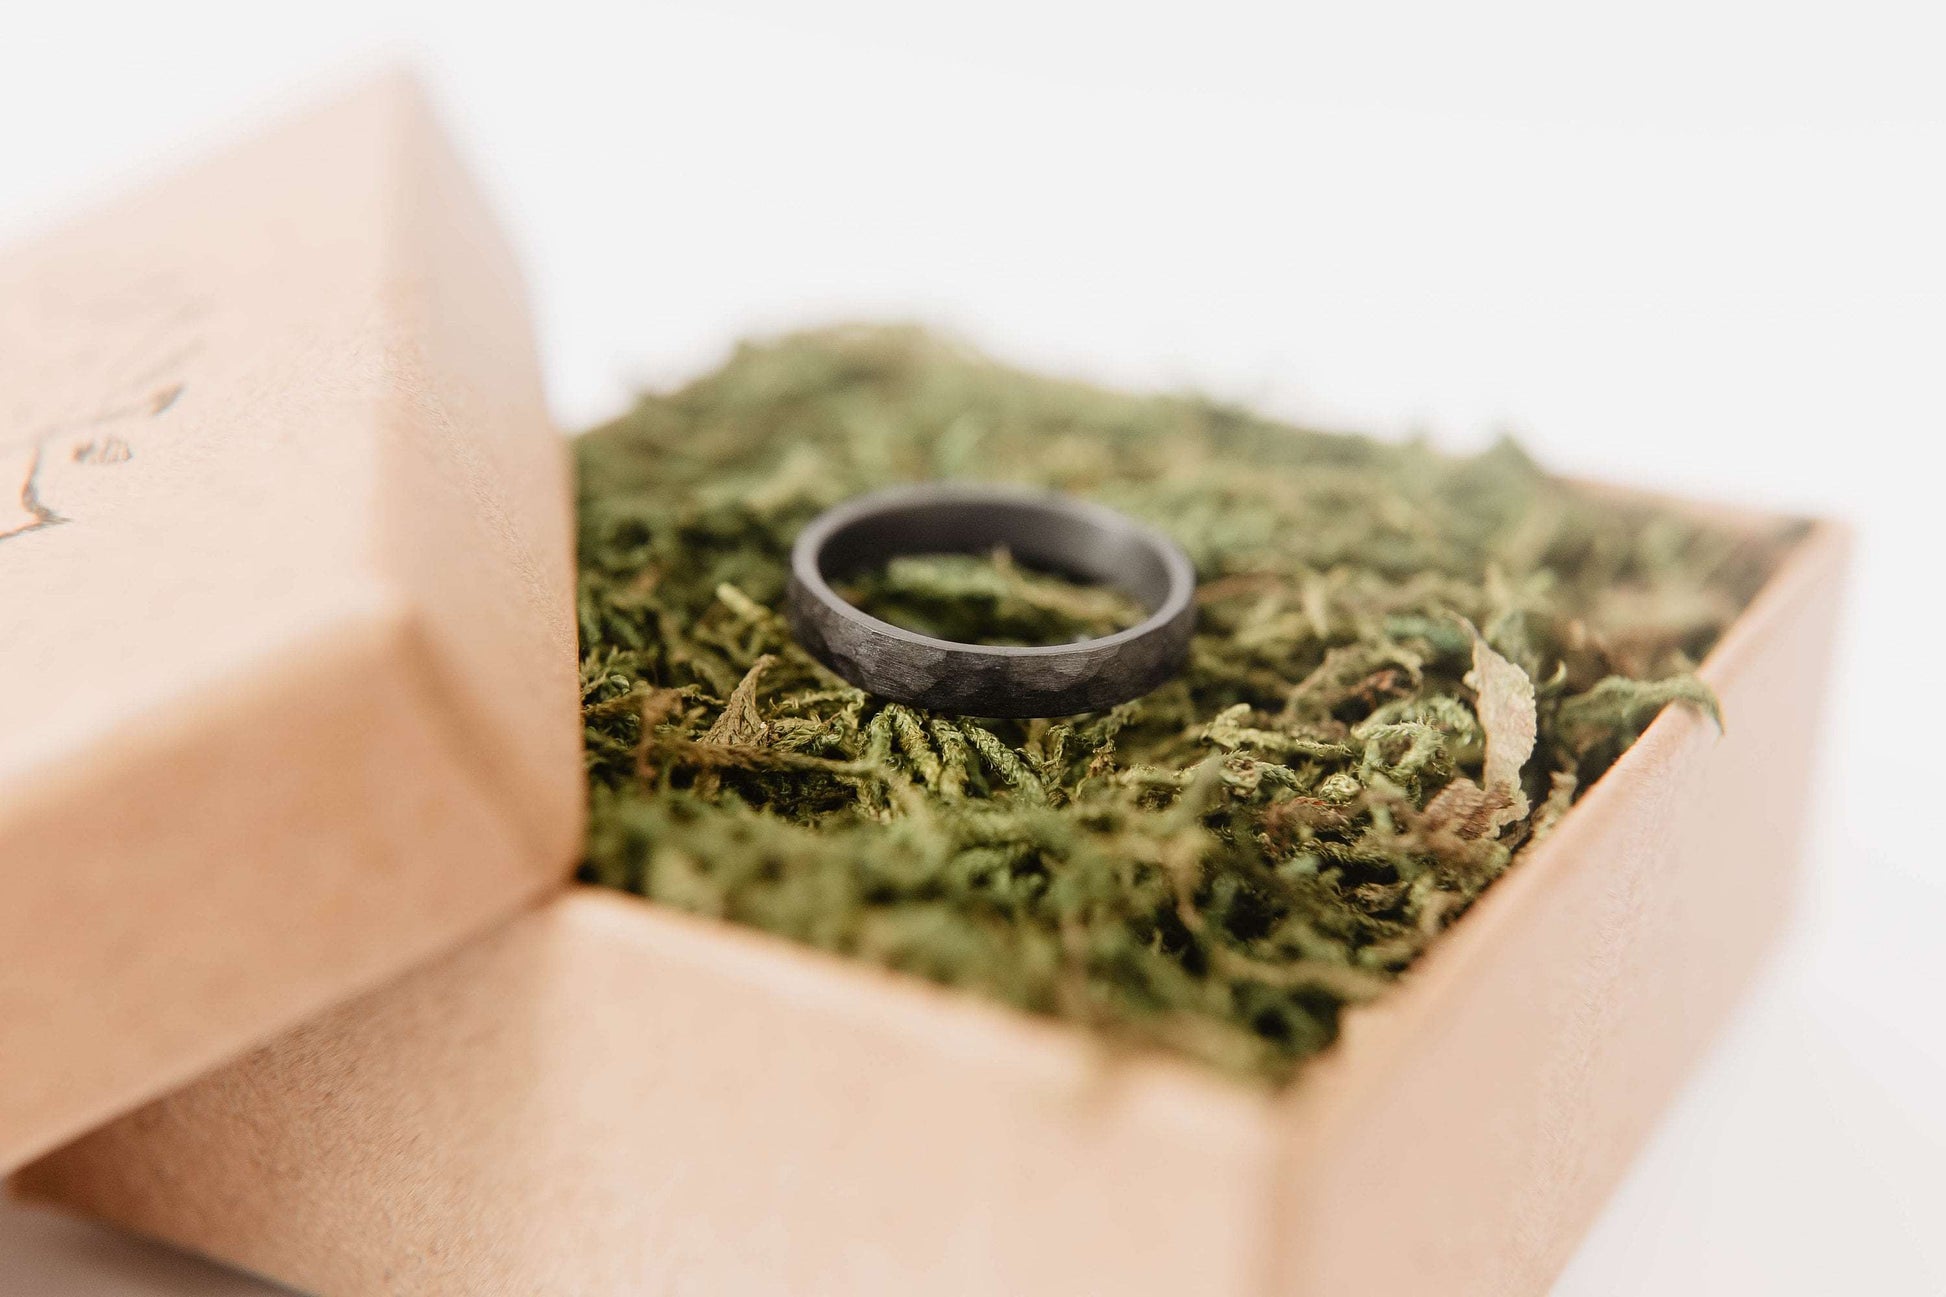 Womens black wedding band. This photo shows a lightly faceted black zirconium ring. (horizontal in ring box with moss))